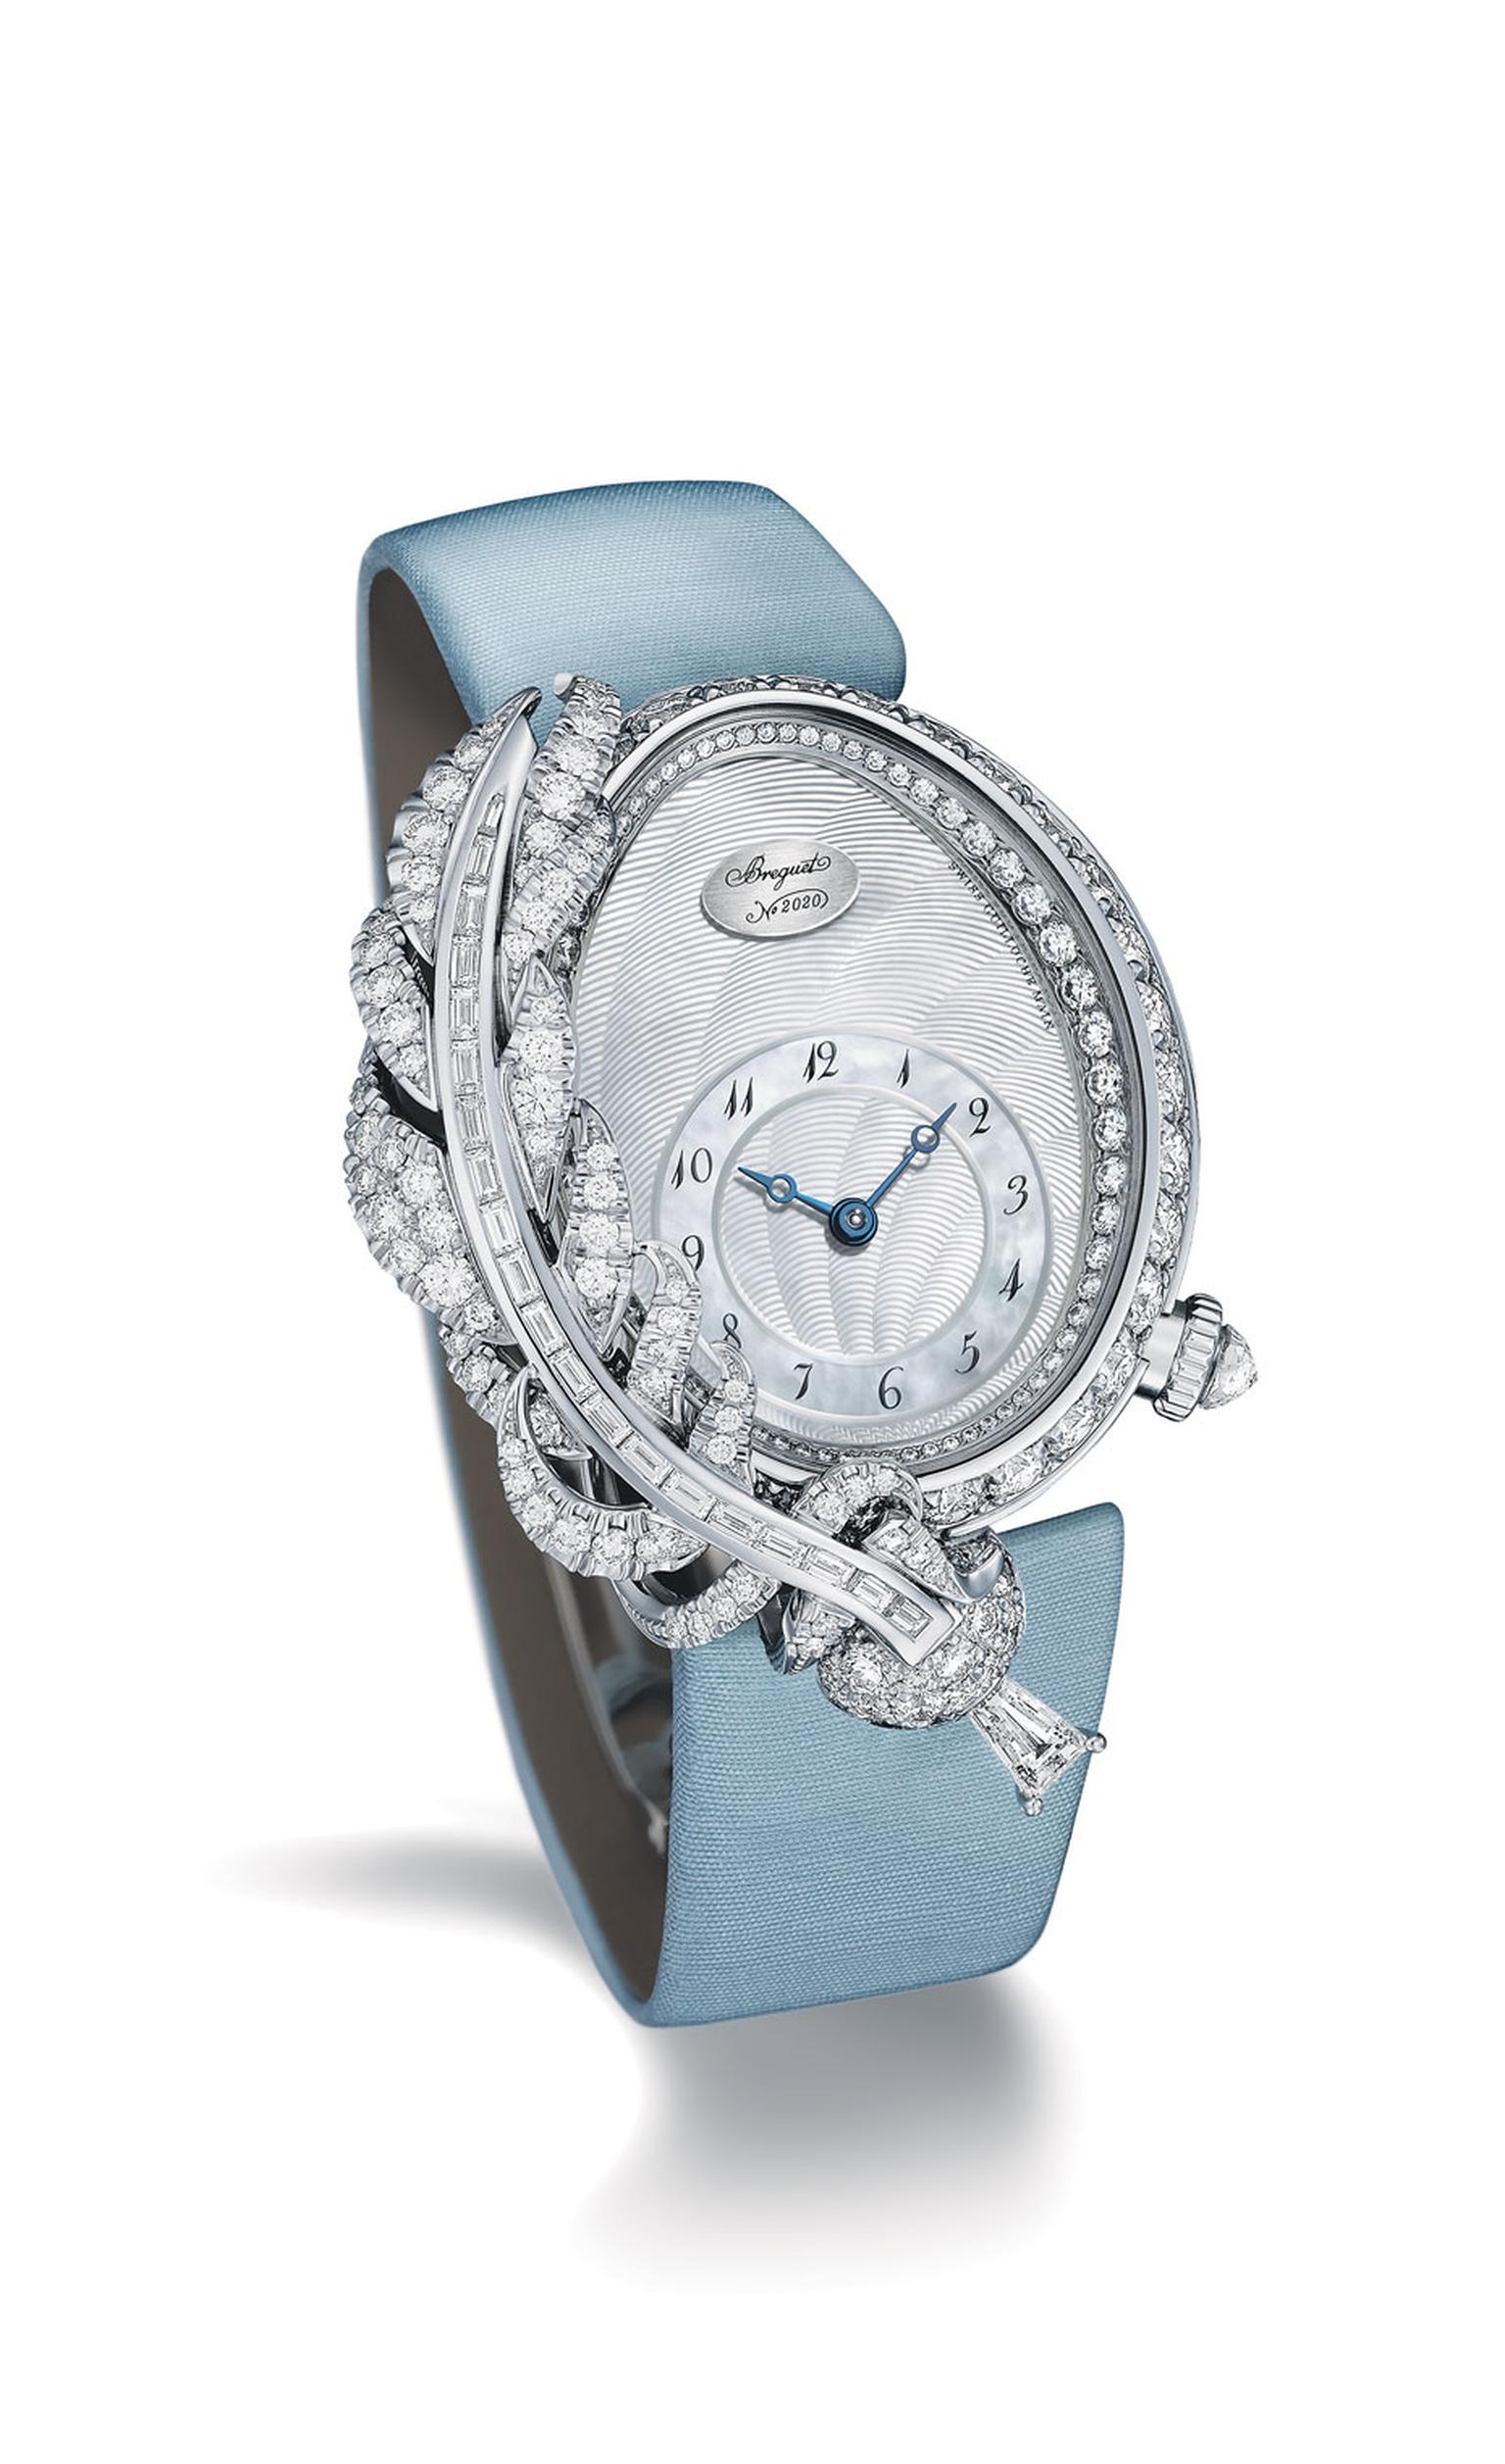 Breguet watches Rêve de Plume high jewellery timepiece draws inspiration from the quill ink pen used by Queen Marie-Antoinette. The white gold model features a feather positioned on the left side of the bezel. More than 4.00 carats of diamonds in differen